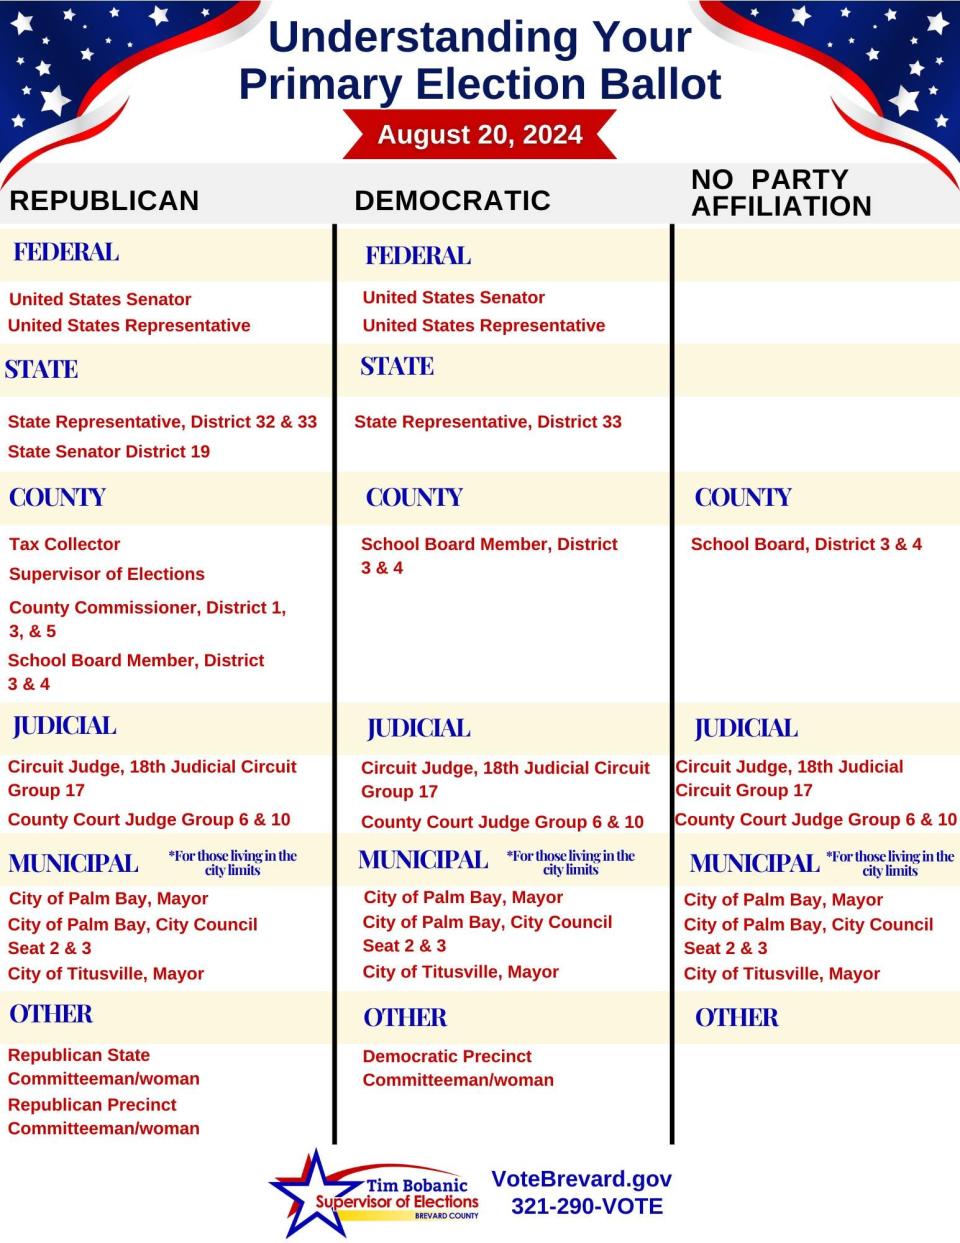 This graphic breaks down what primary election voters will see on their ballot, based on their political party registration.